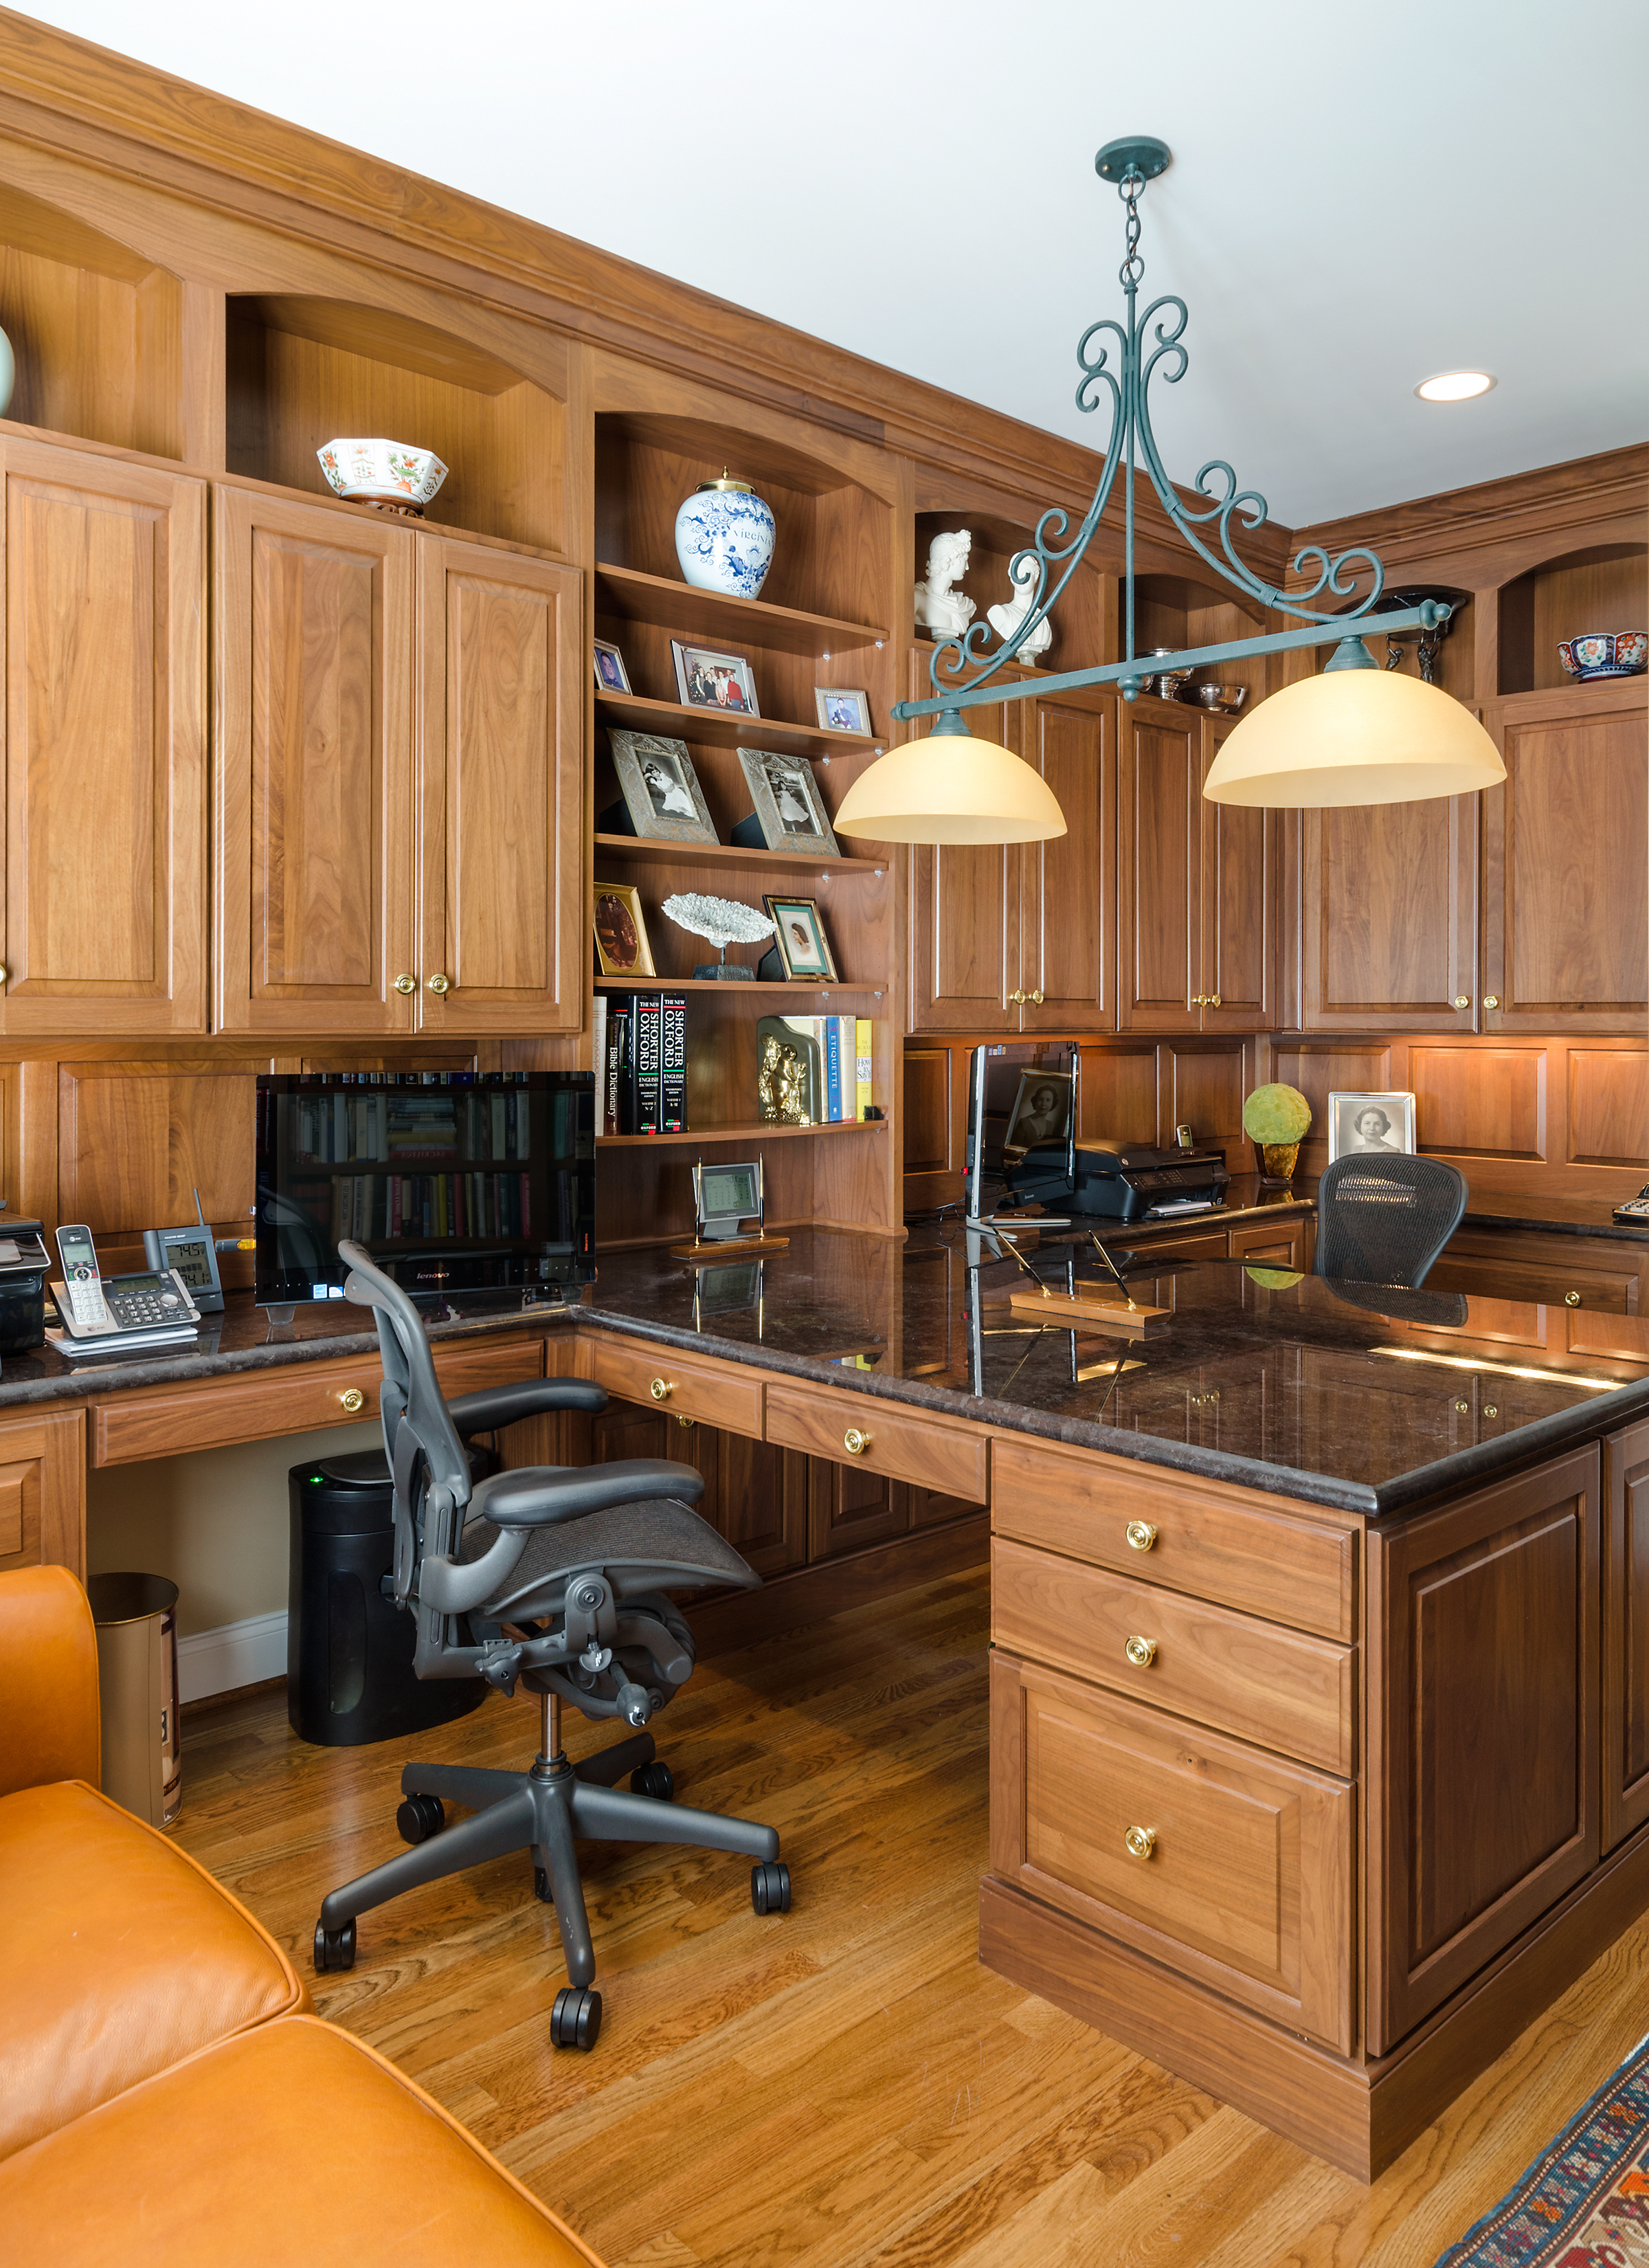 https://crystalcabinets.com/wp-content/uploads/2018/05/Crystalcabinets_Other_Office_CountryClassic_Wheaton_1.jpg